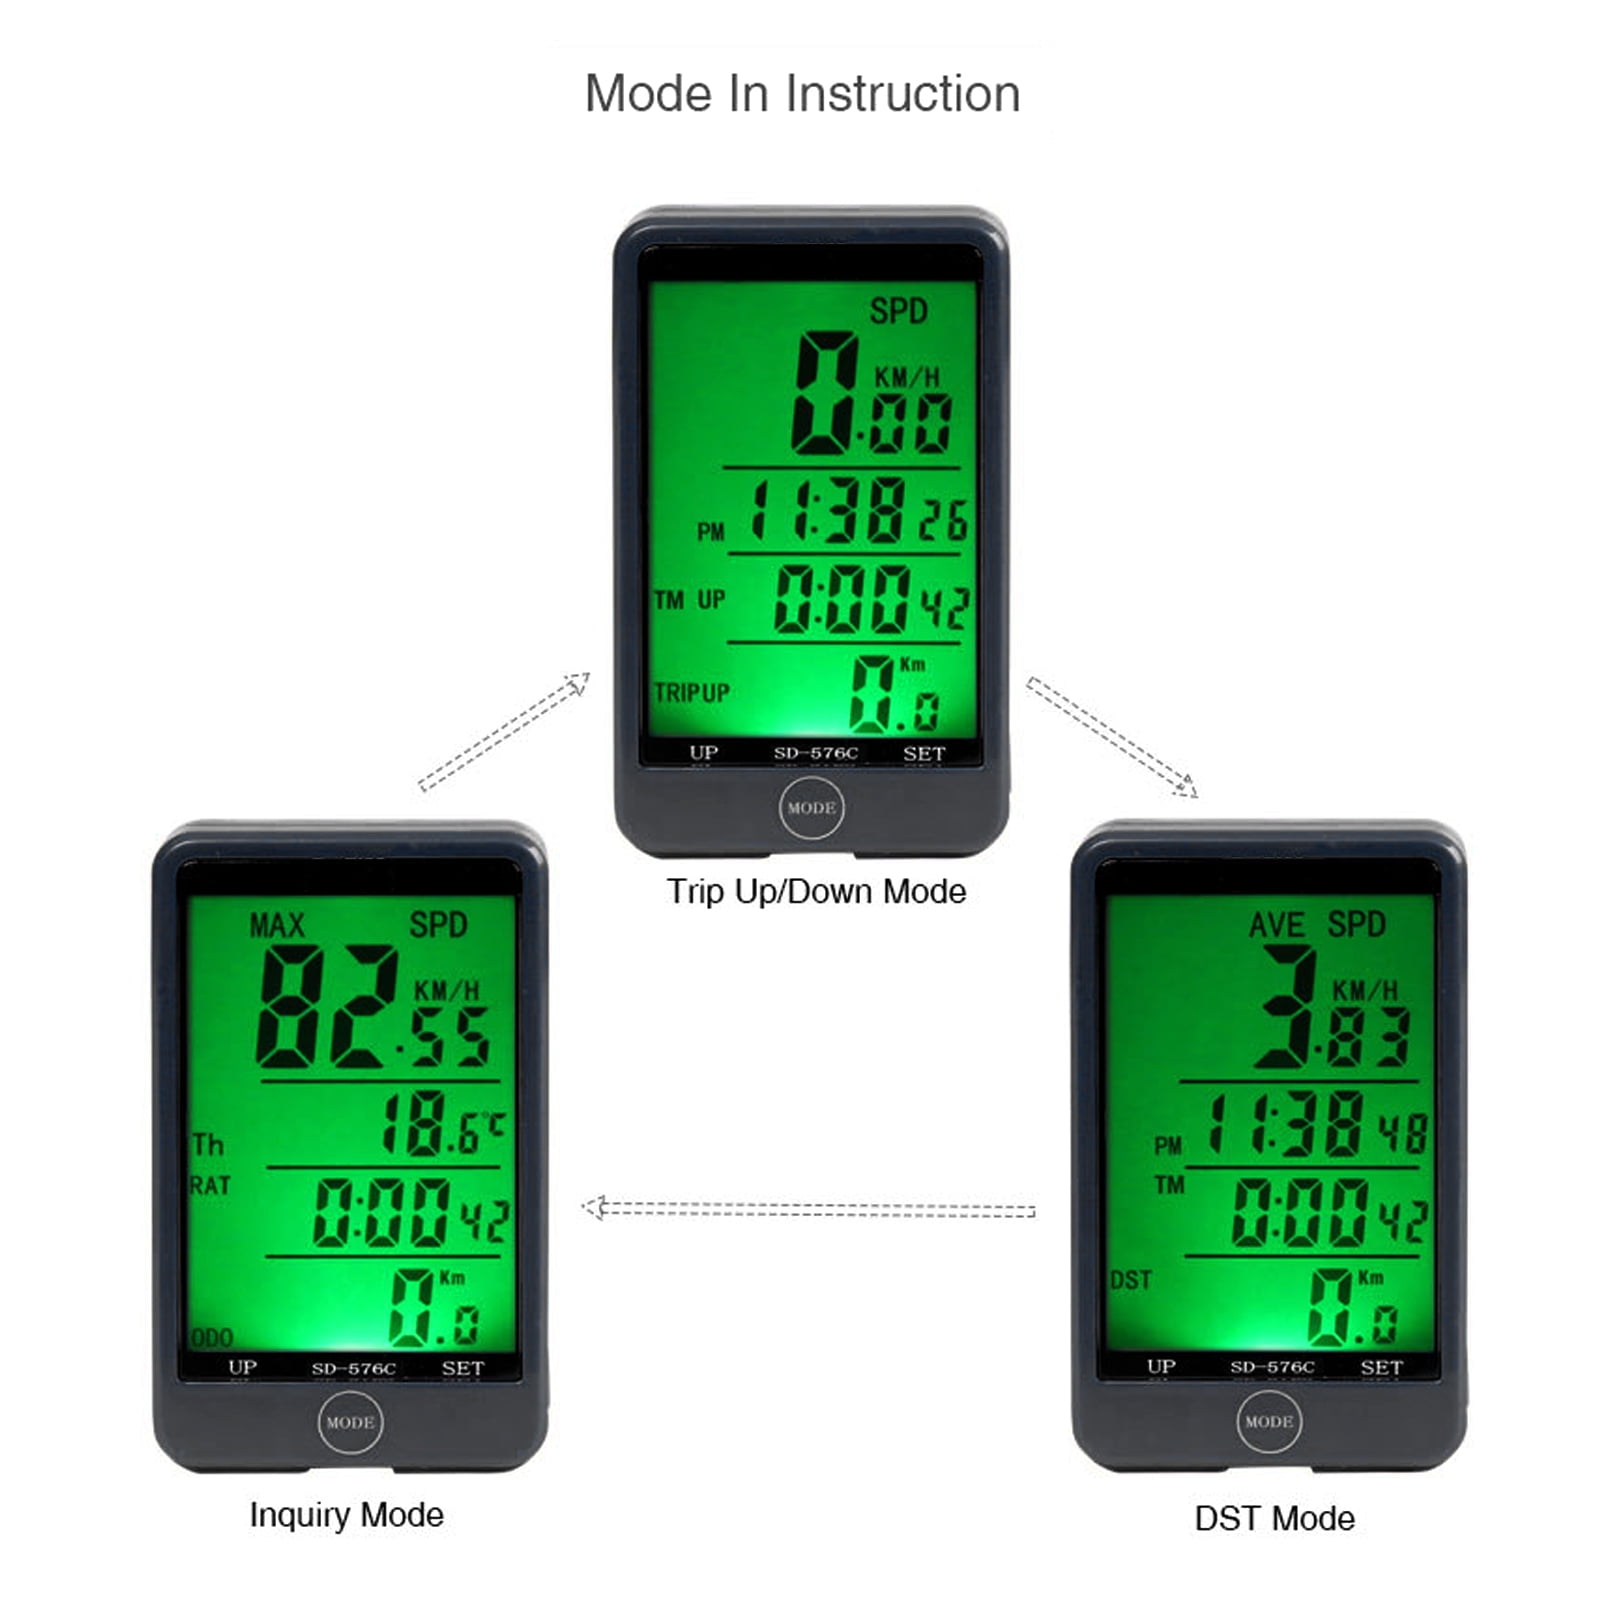 Walmeck YS Multi Functions Bike Computer Wired/Wireless Bicycle Cycling Computer Speedometer Odometer with Backlight